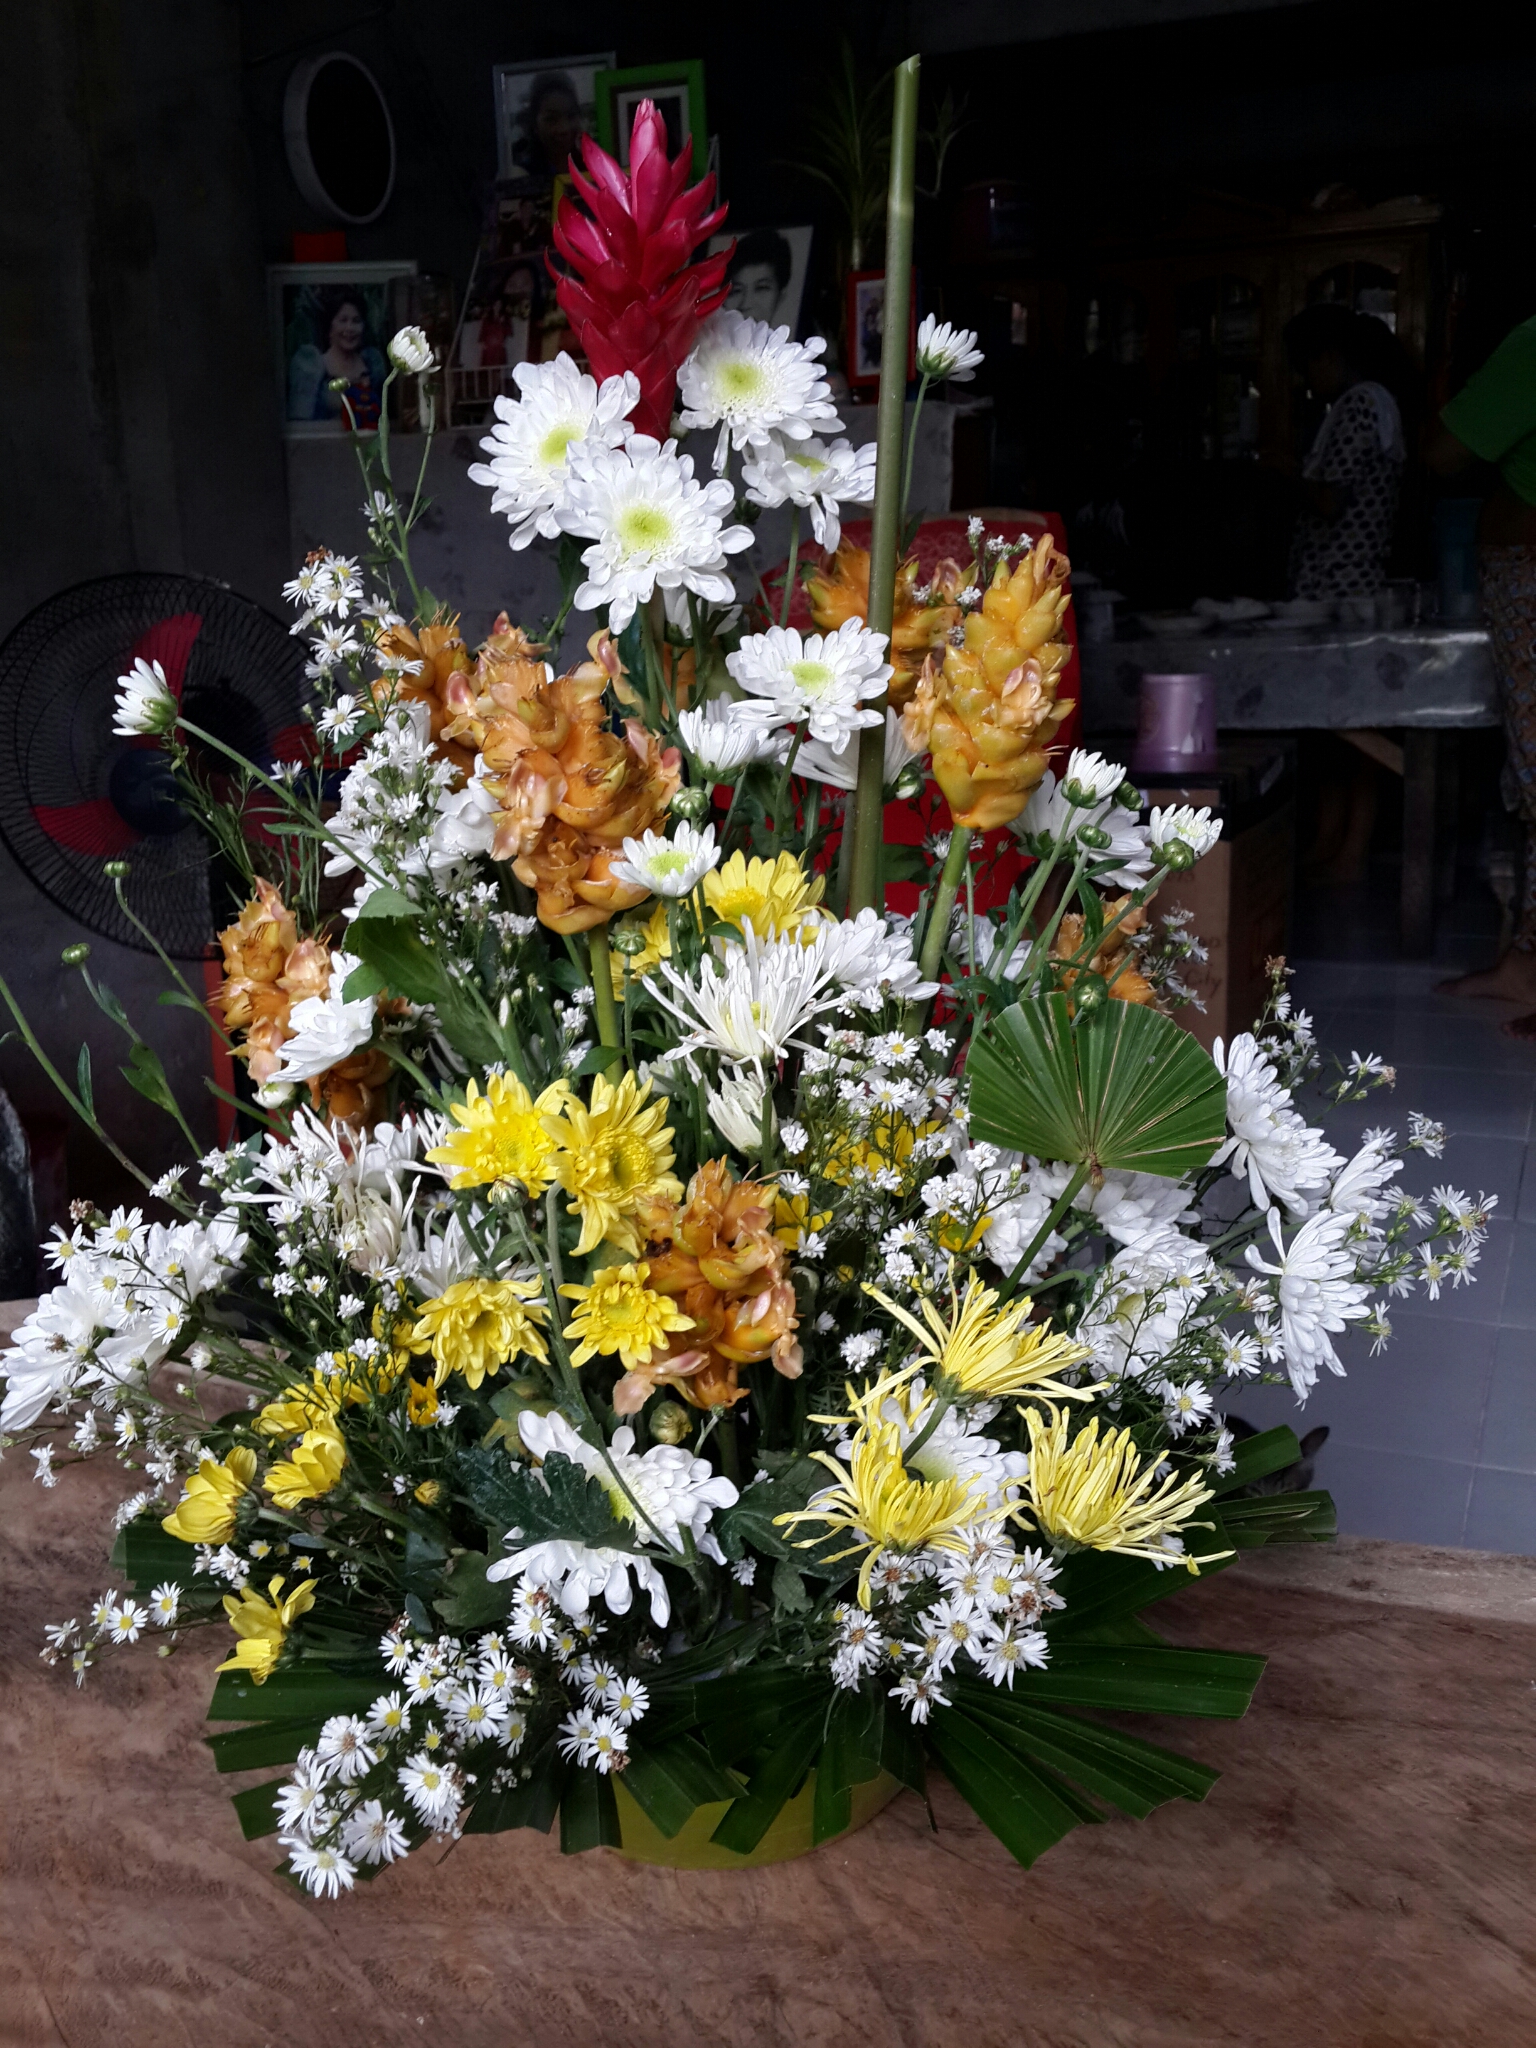 Image is mine. It is my dearly beloved's floral arrangement for our late Mama Virgie.